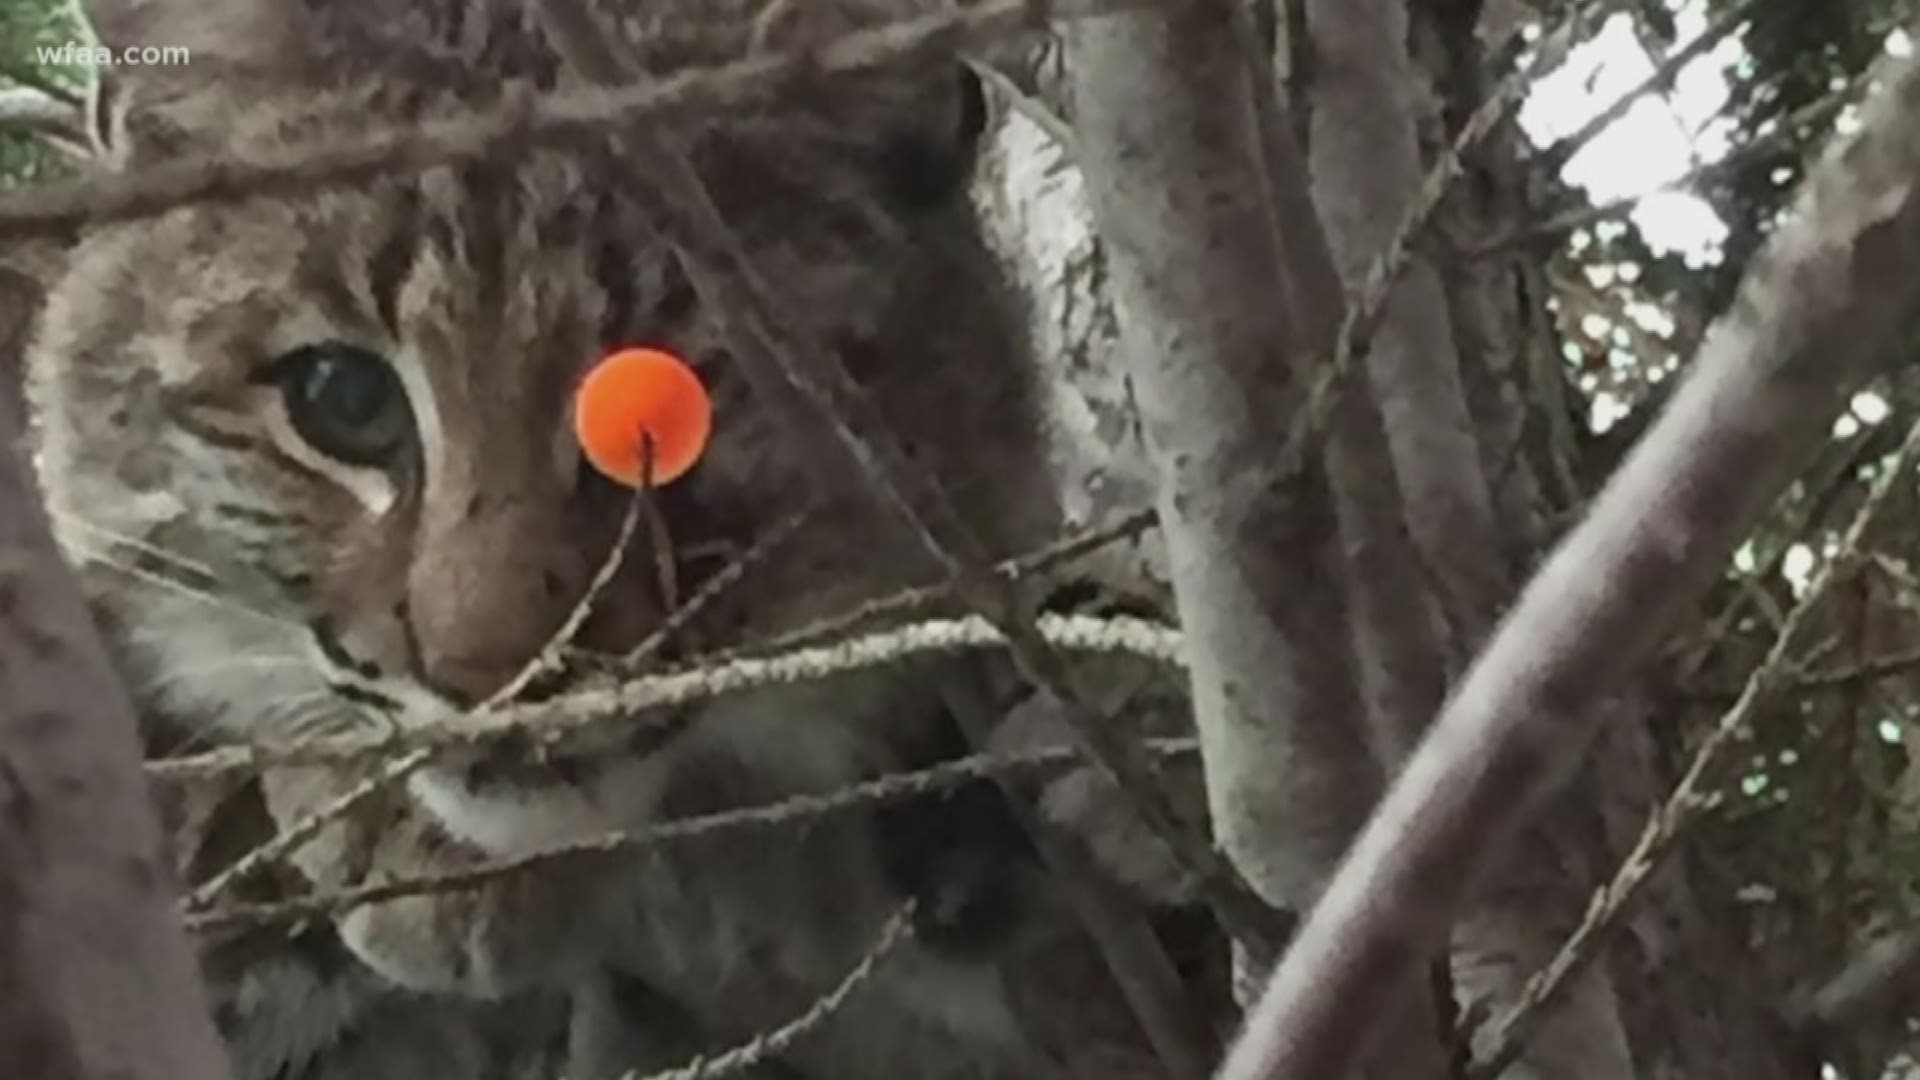 The bobcat, now named Miracle, was shot in the eye with a five-inch blow dart. She now needs another surgery because her vision is obstructed.